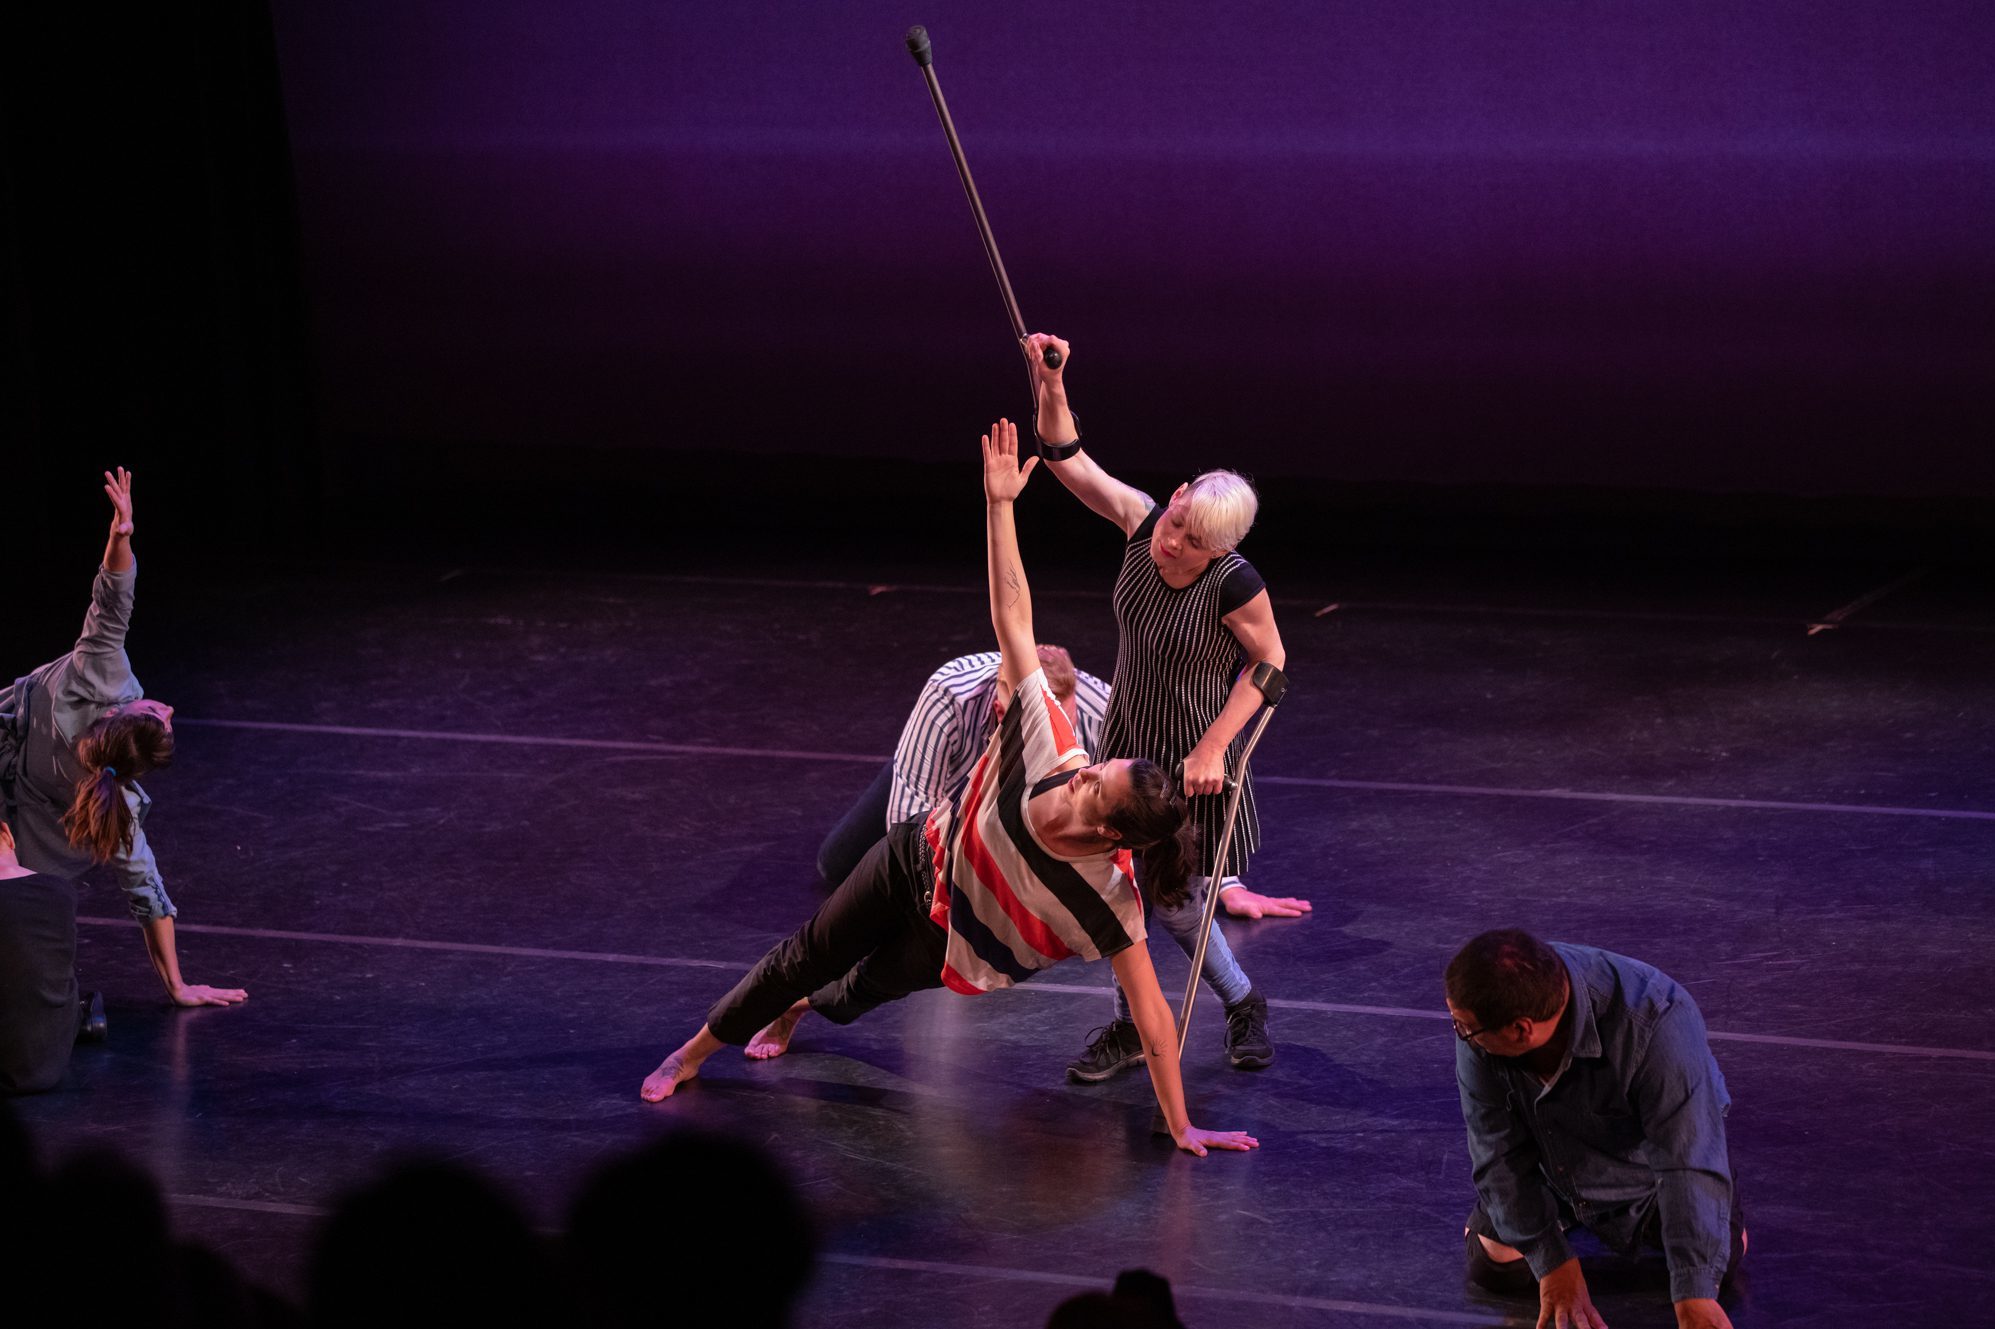 two dancers with and without disabilities perform on stage. One dancer is on the ground and the other stands behind them. Both dancers are reaching one arm towards the ceiling.